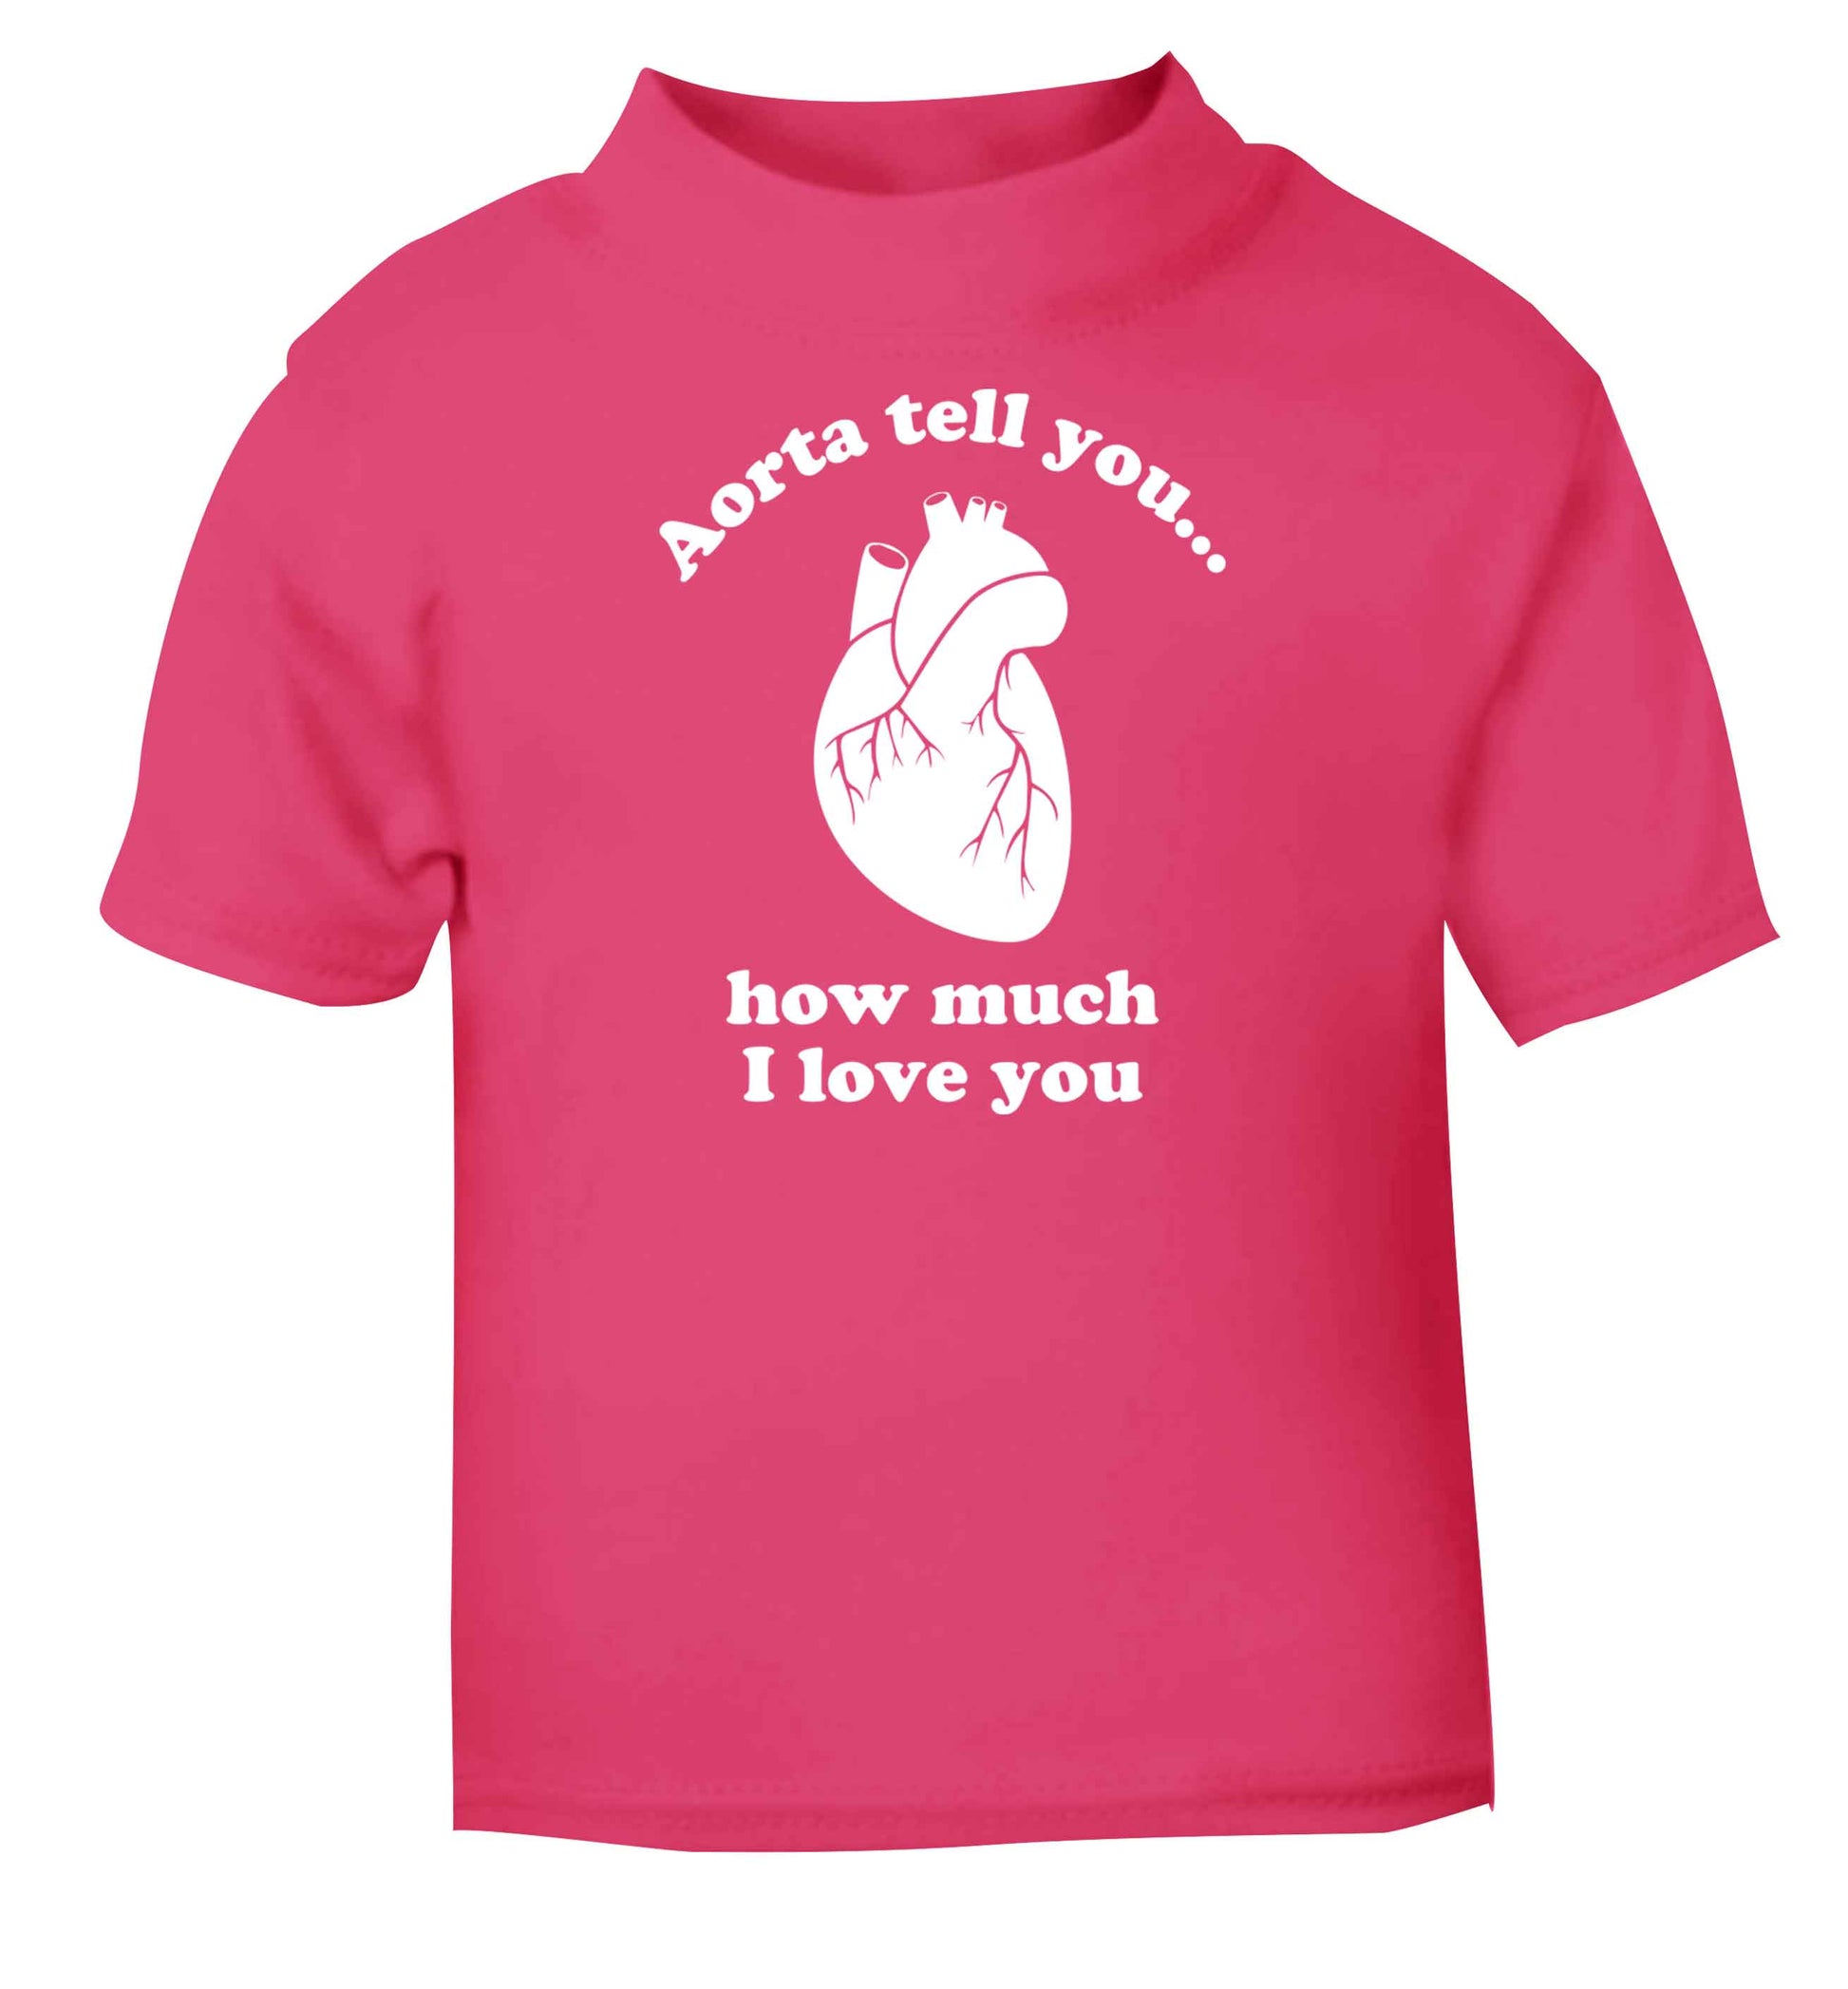 Aorta tell you how much I love you pink baby toddler Tshirt 2 Years